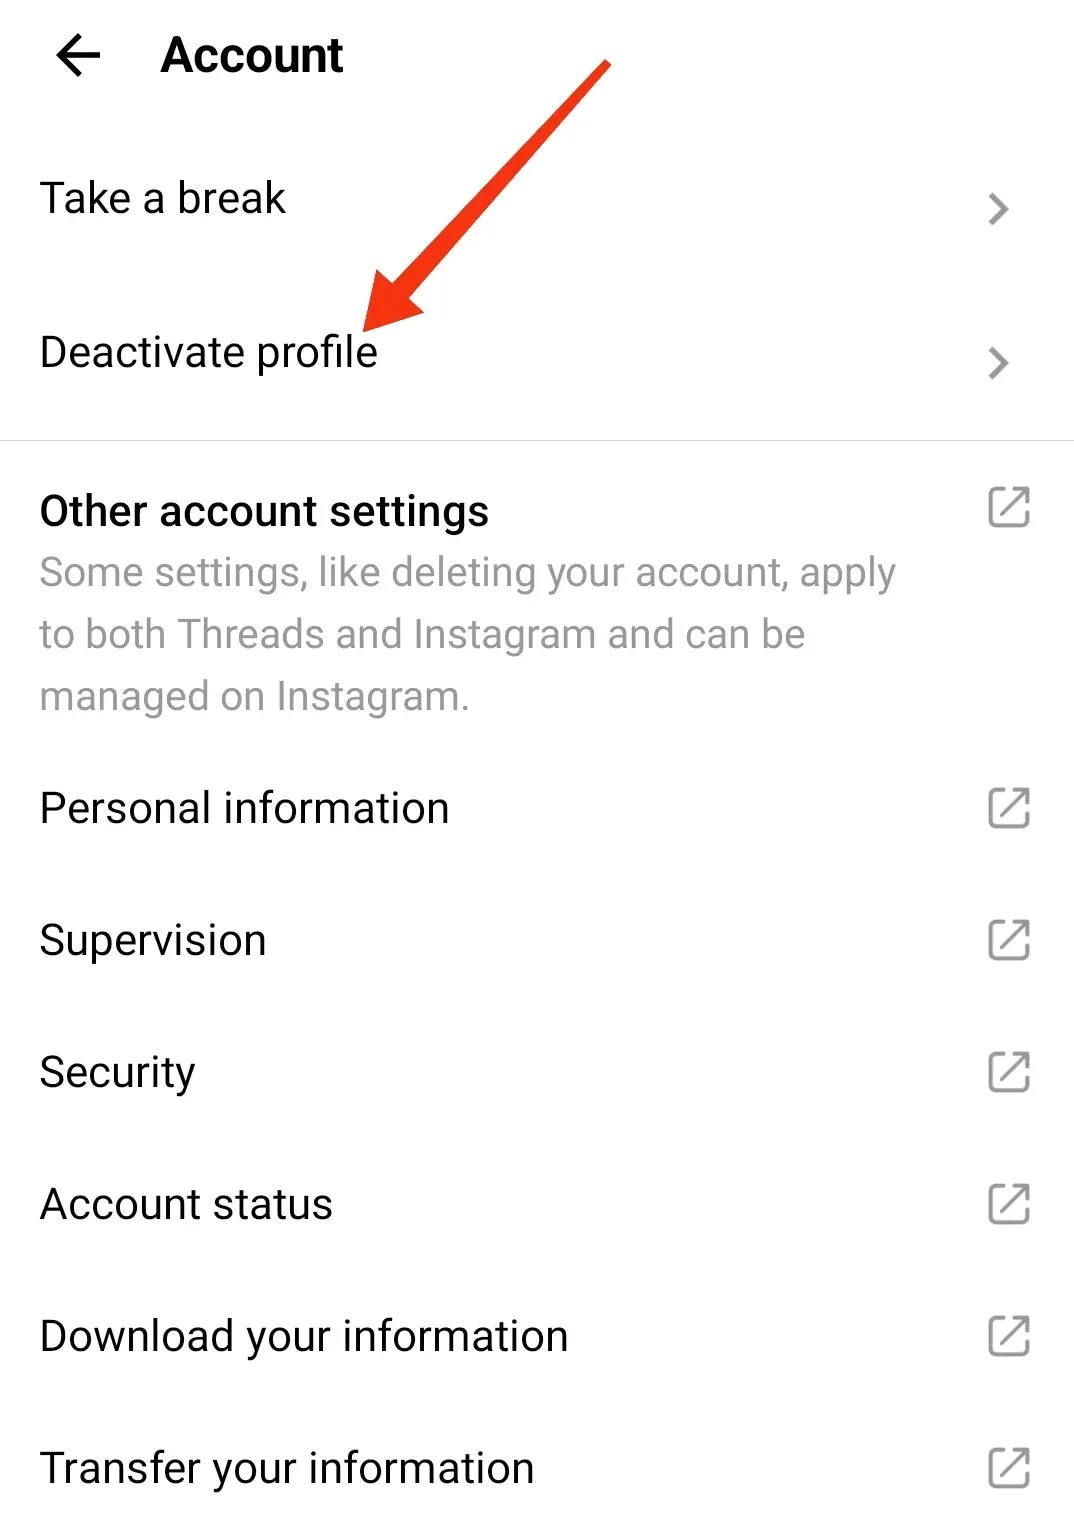 Go to Deactivate Profile Section